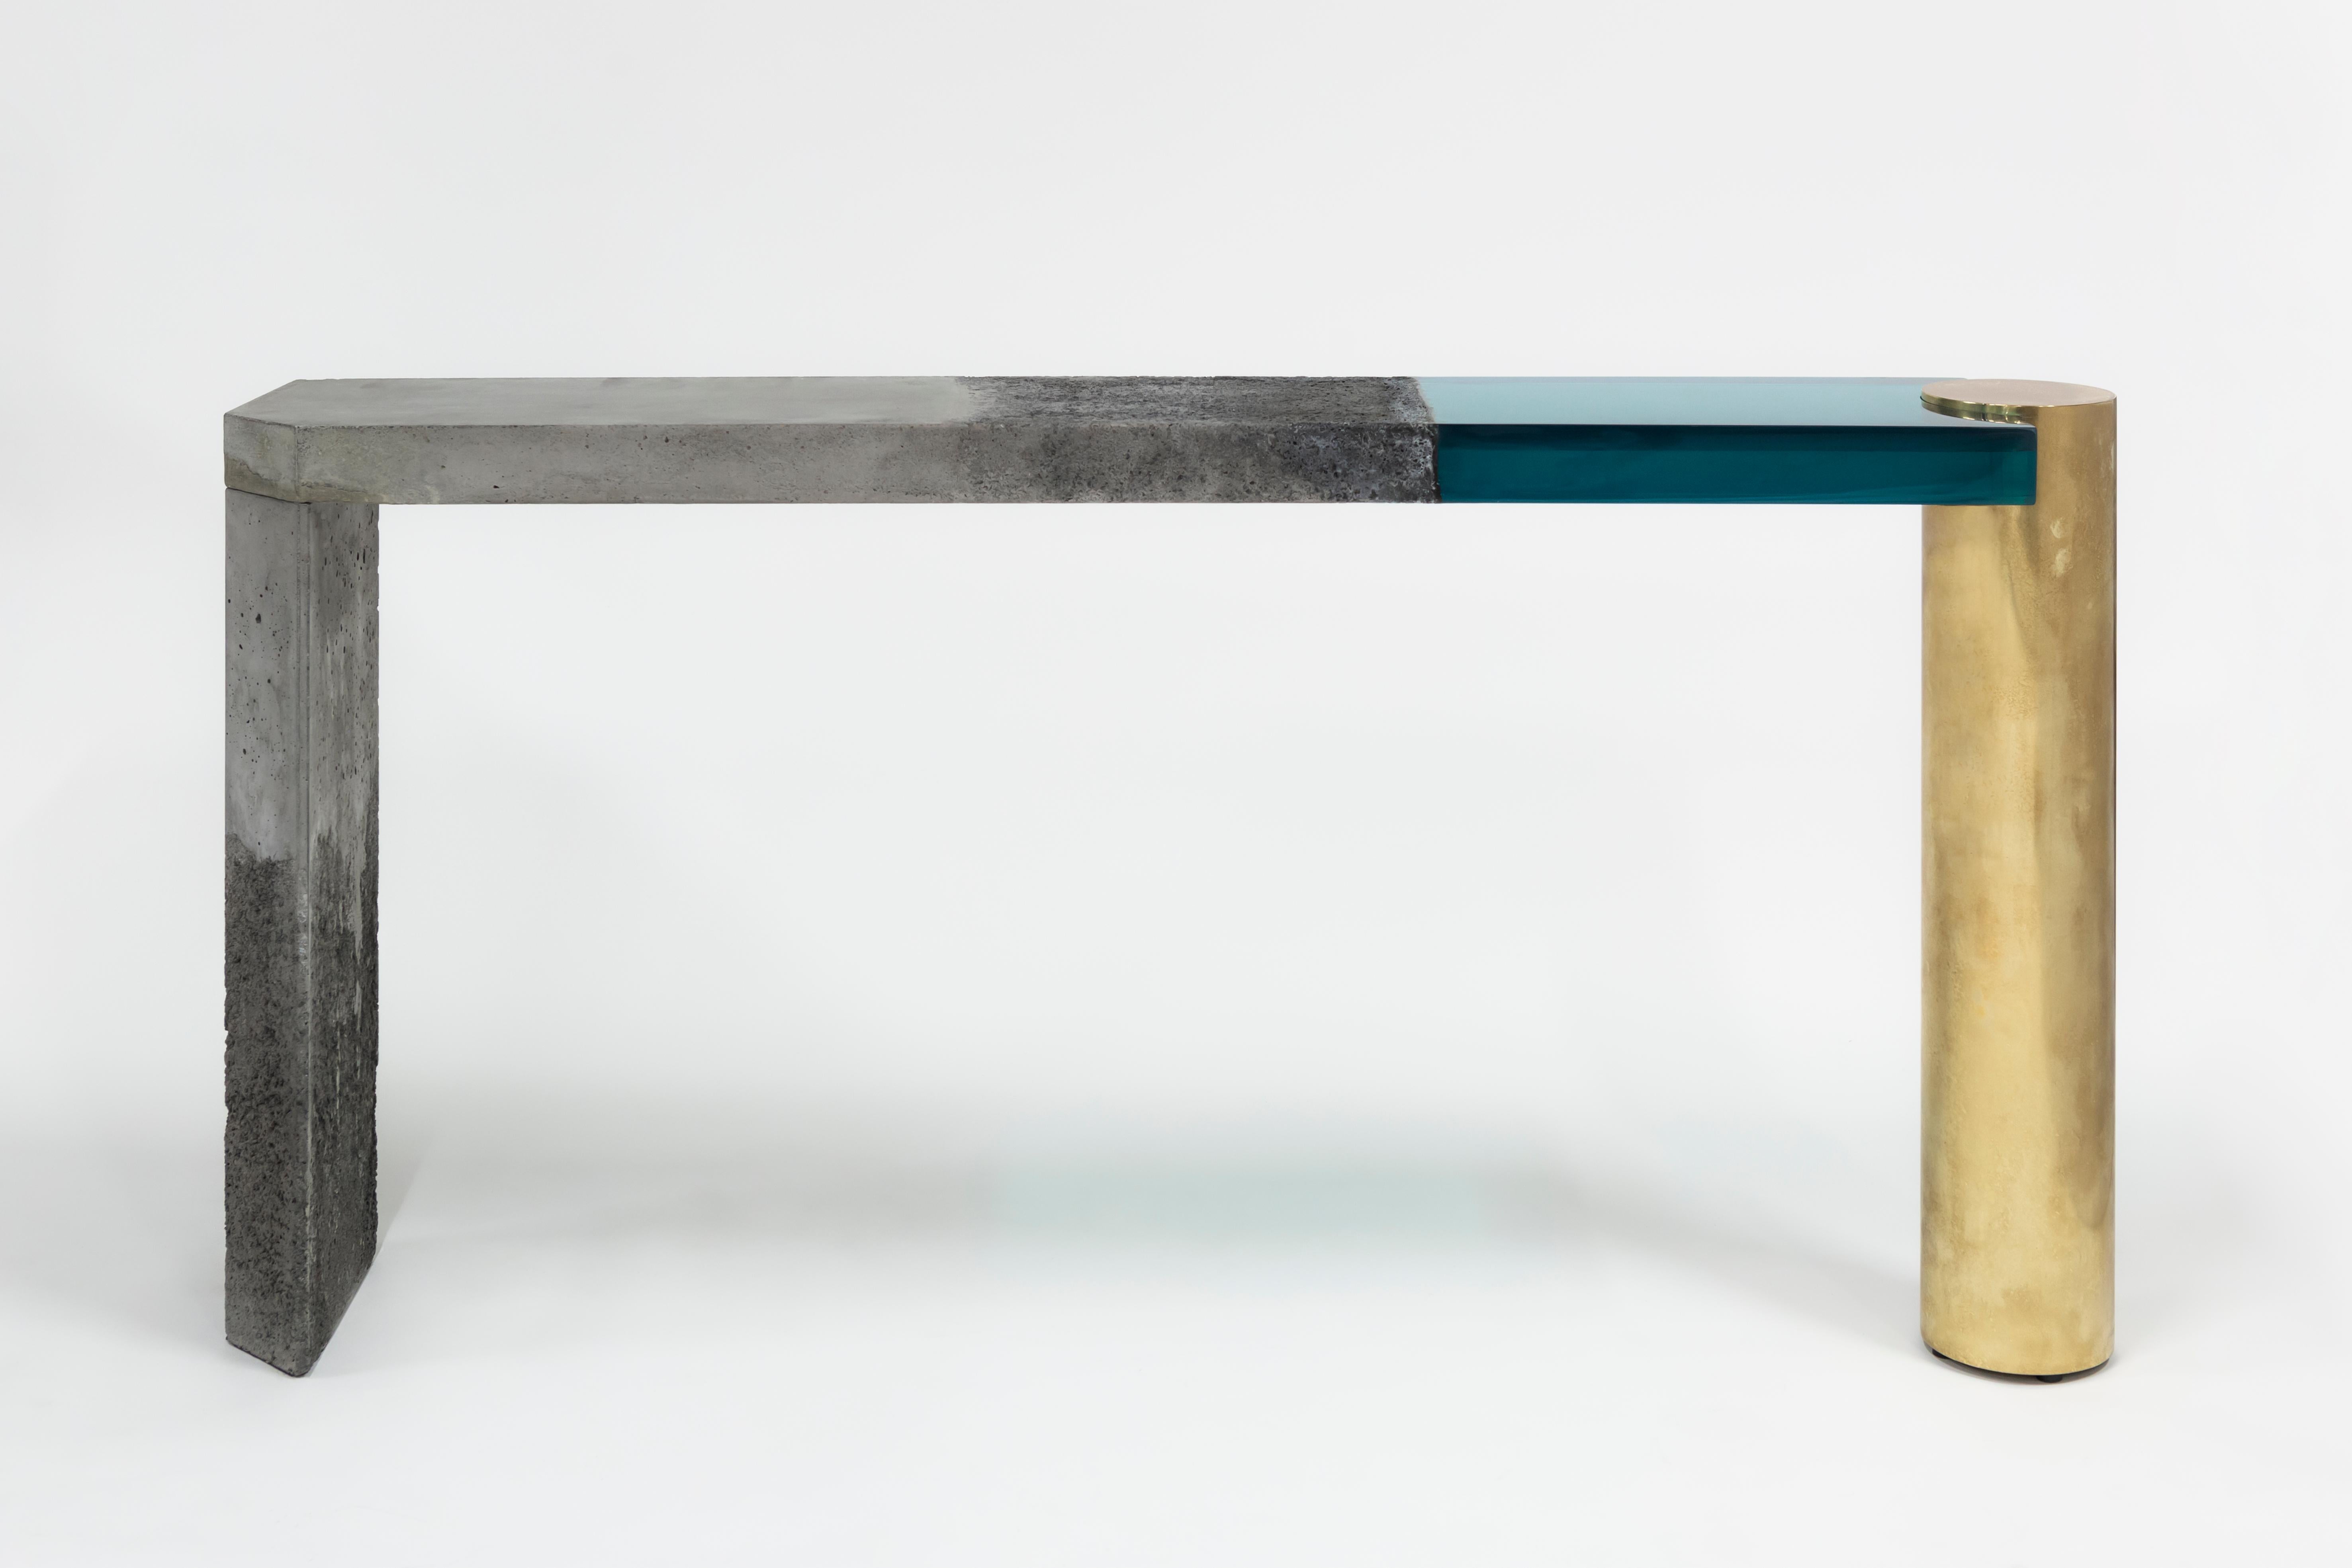 Golia console by Draga & Aurel.
Dimensions: W 169 x D 30 x H 85 cm
Materials: Resin, Concrete, Etched brass.


The Golia consoles are featured by sculptural, almost monumental forms, and by an unusual combination of material: The raw, solid